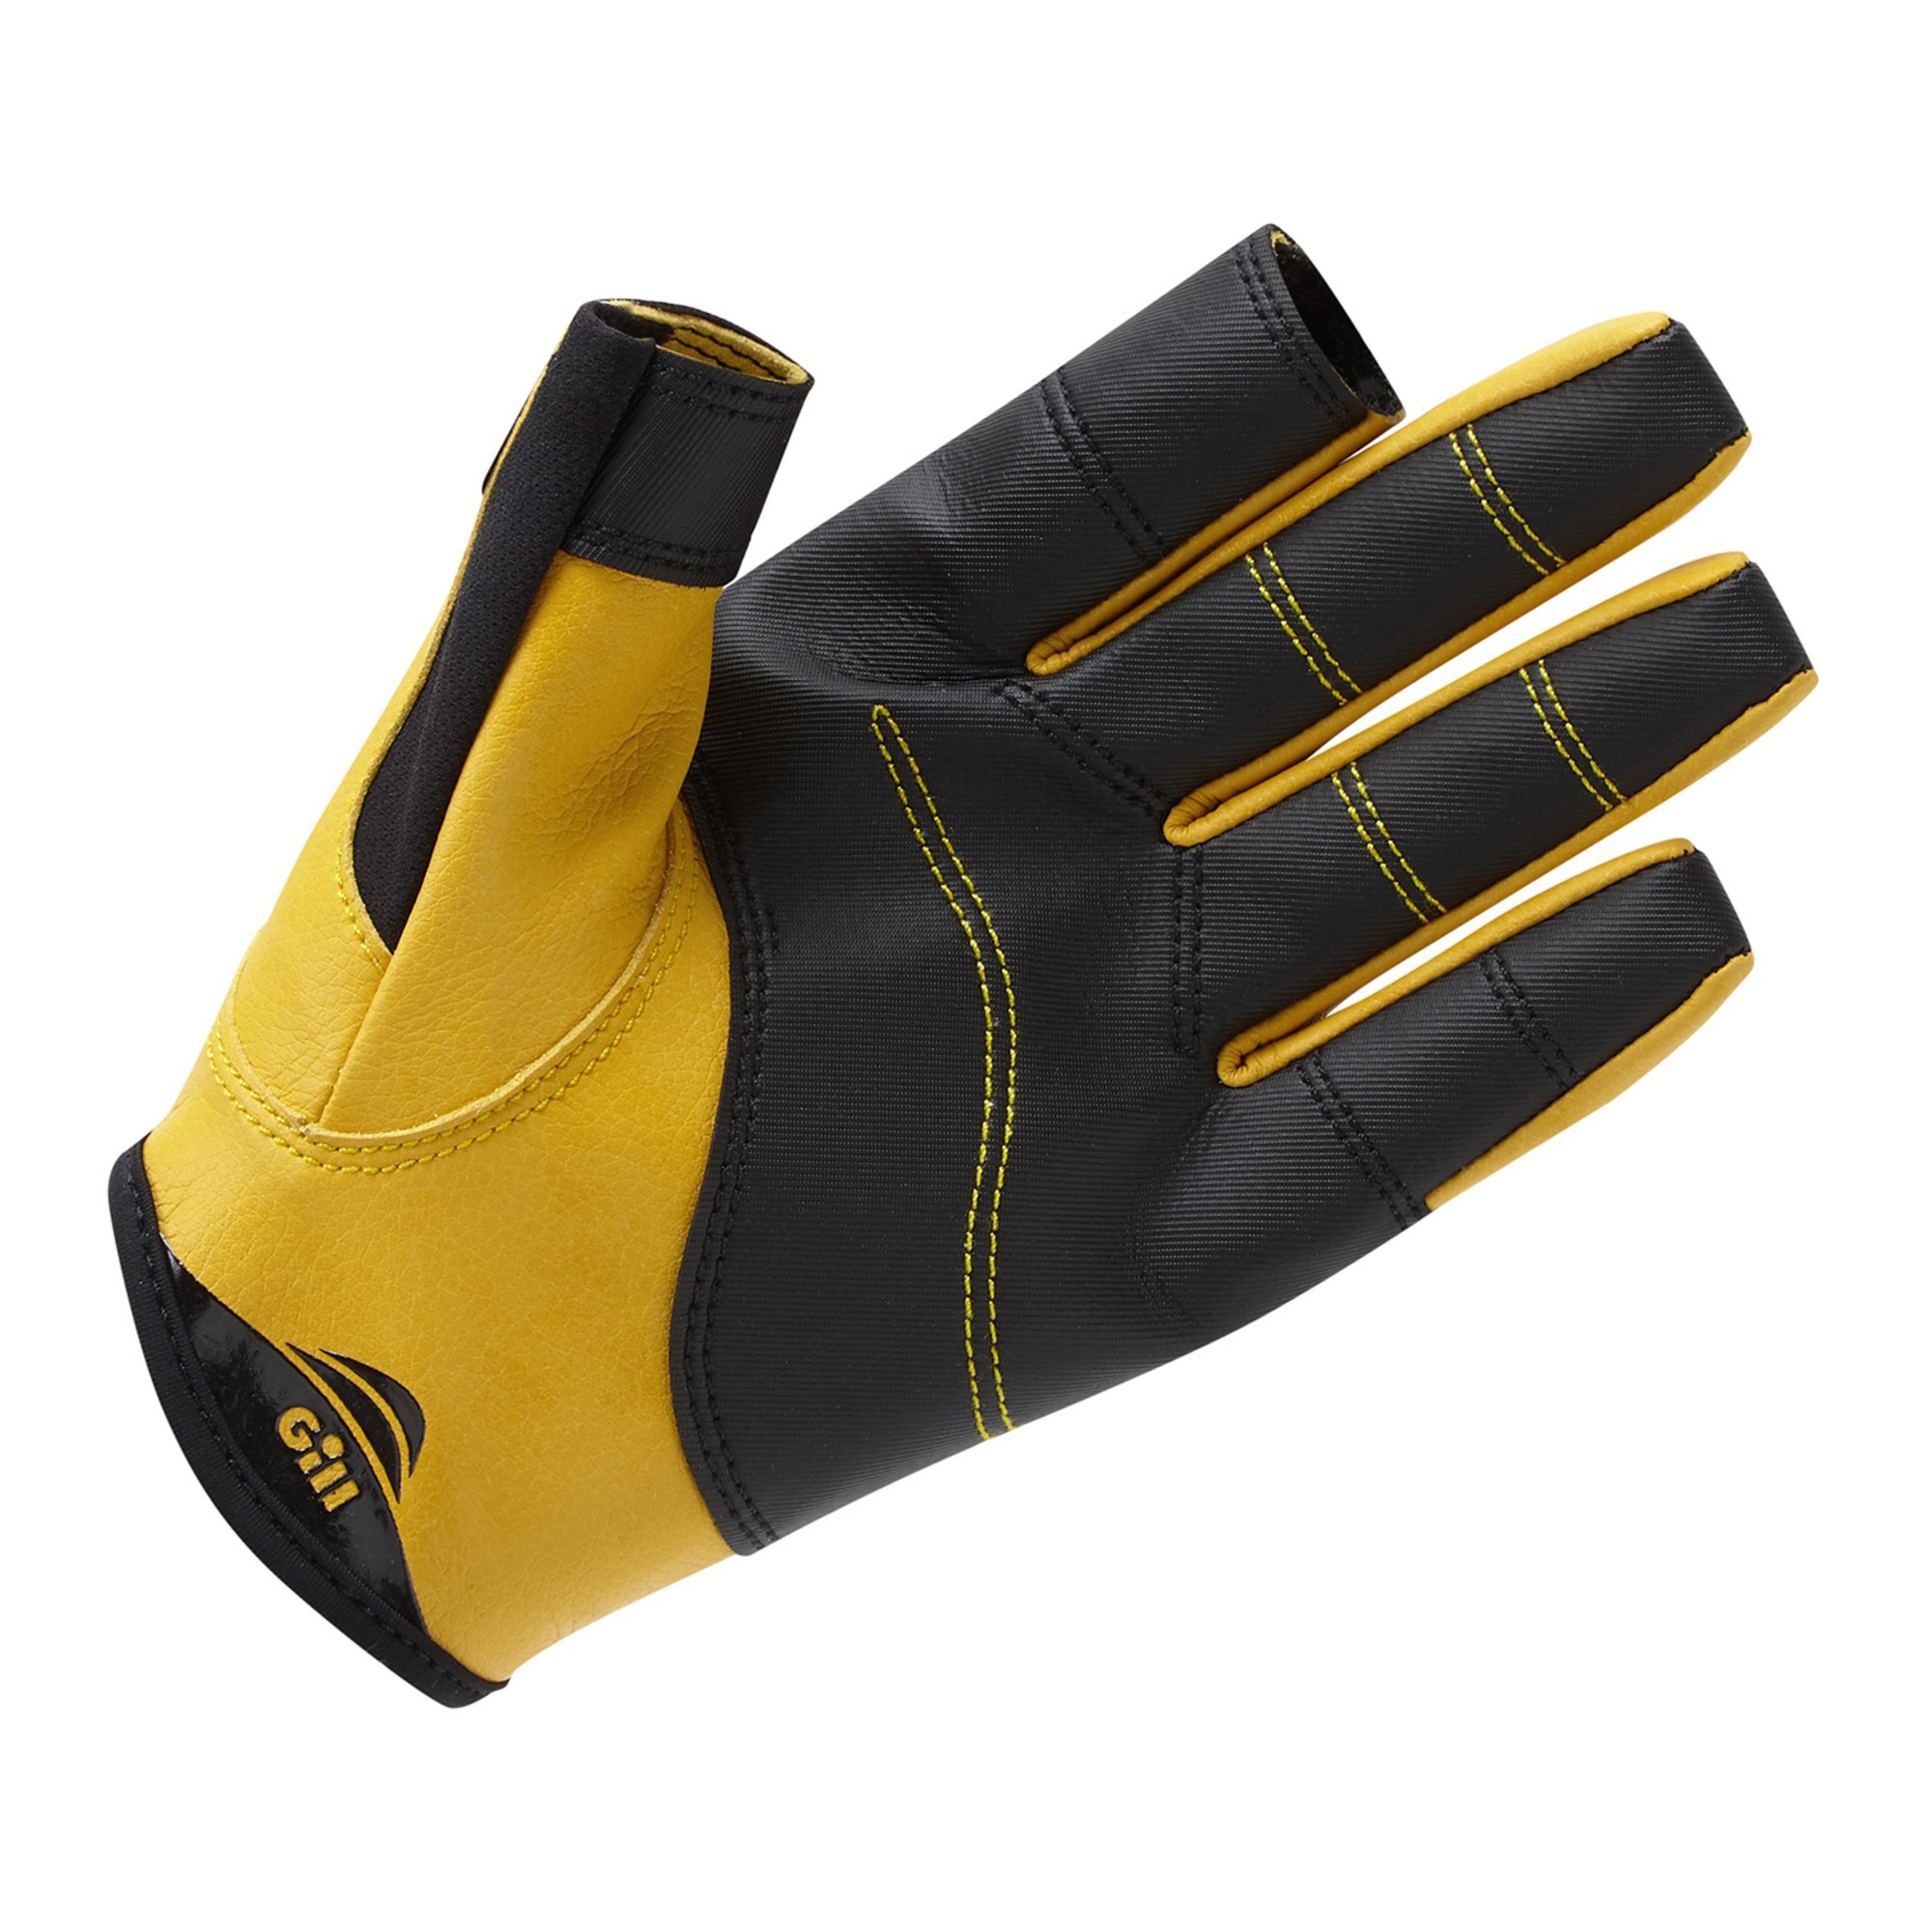 Details about   Gill Marine Pro Glove Long Fingered Sailing Gloves 7450 